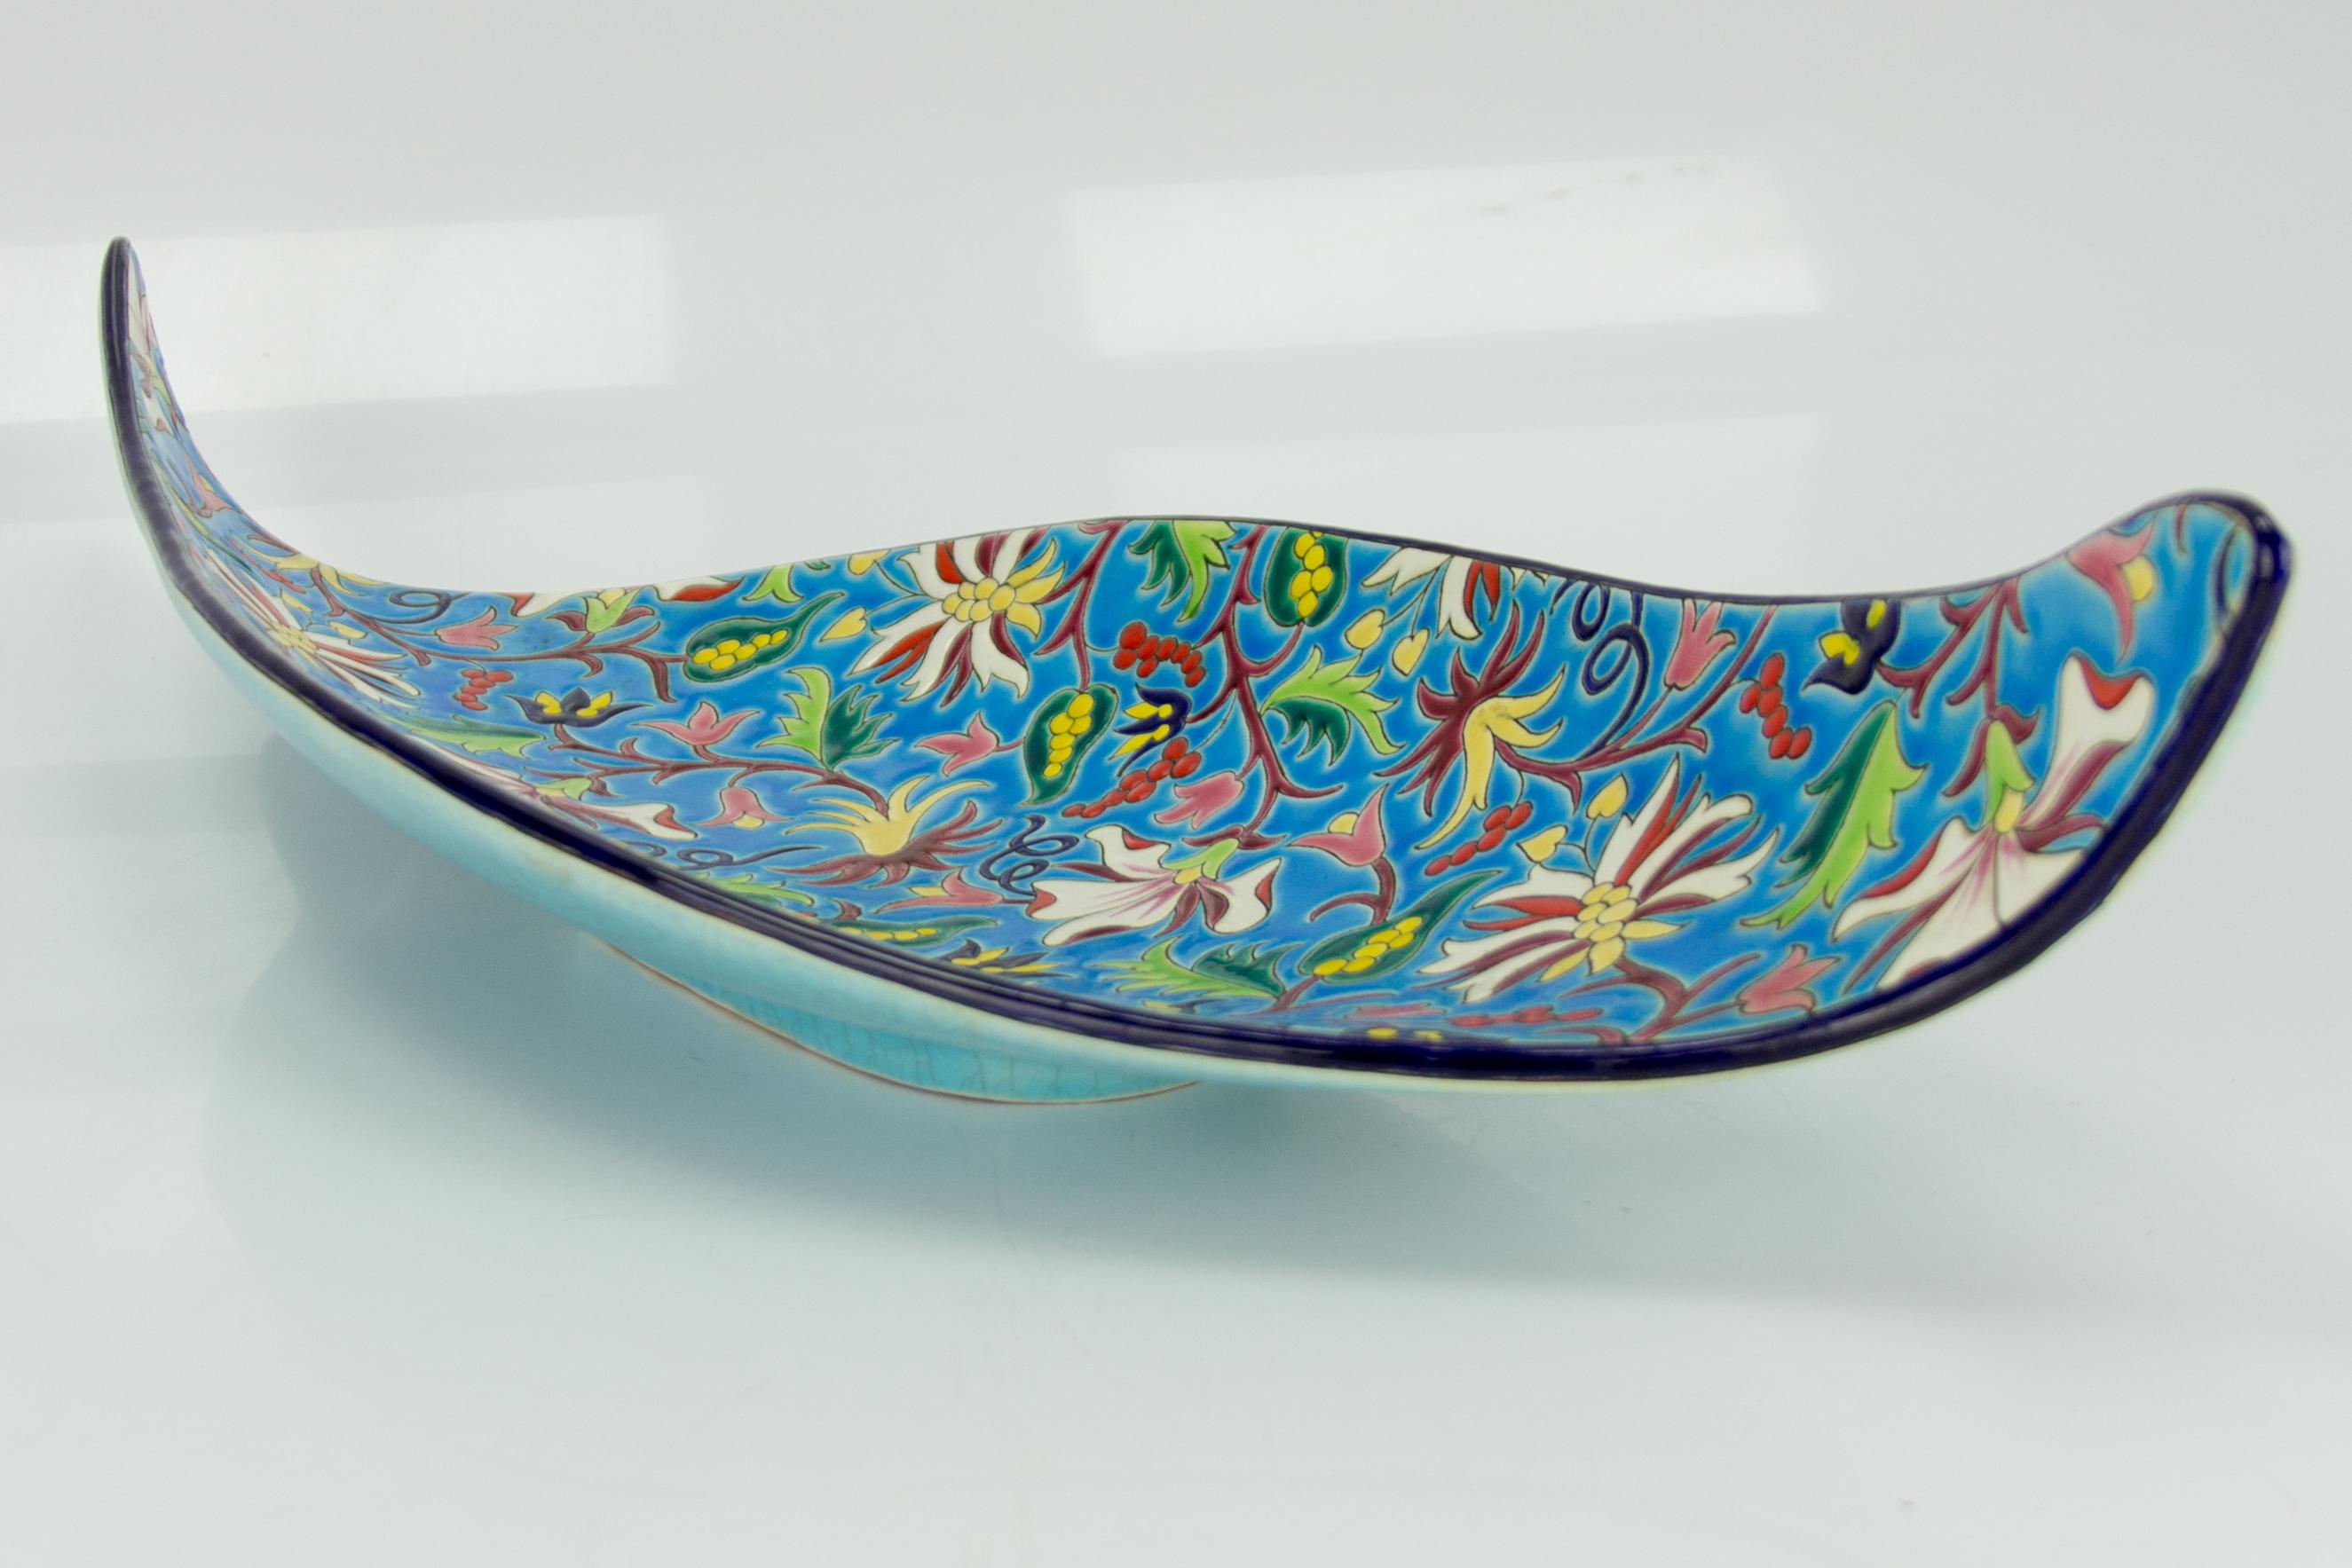 Floral and Turquoise Ceramic Fruit Platter by Manufacture of Longwy Enamels For Sale 3